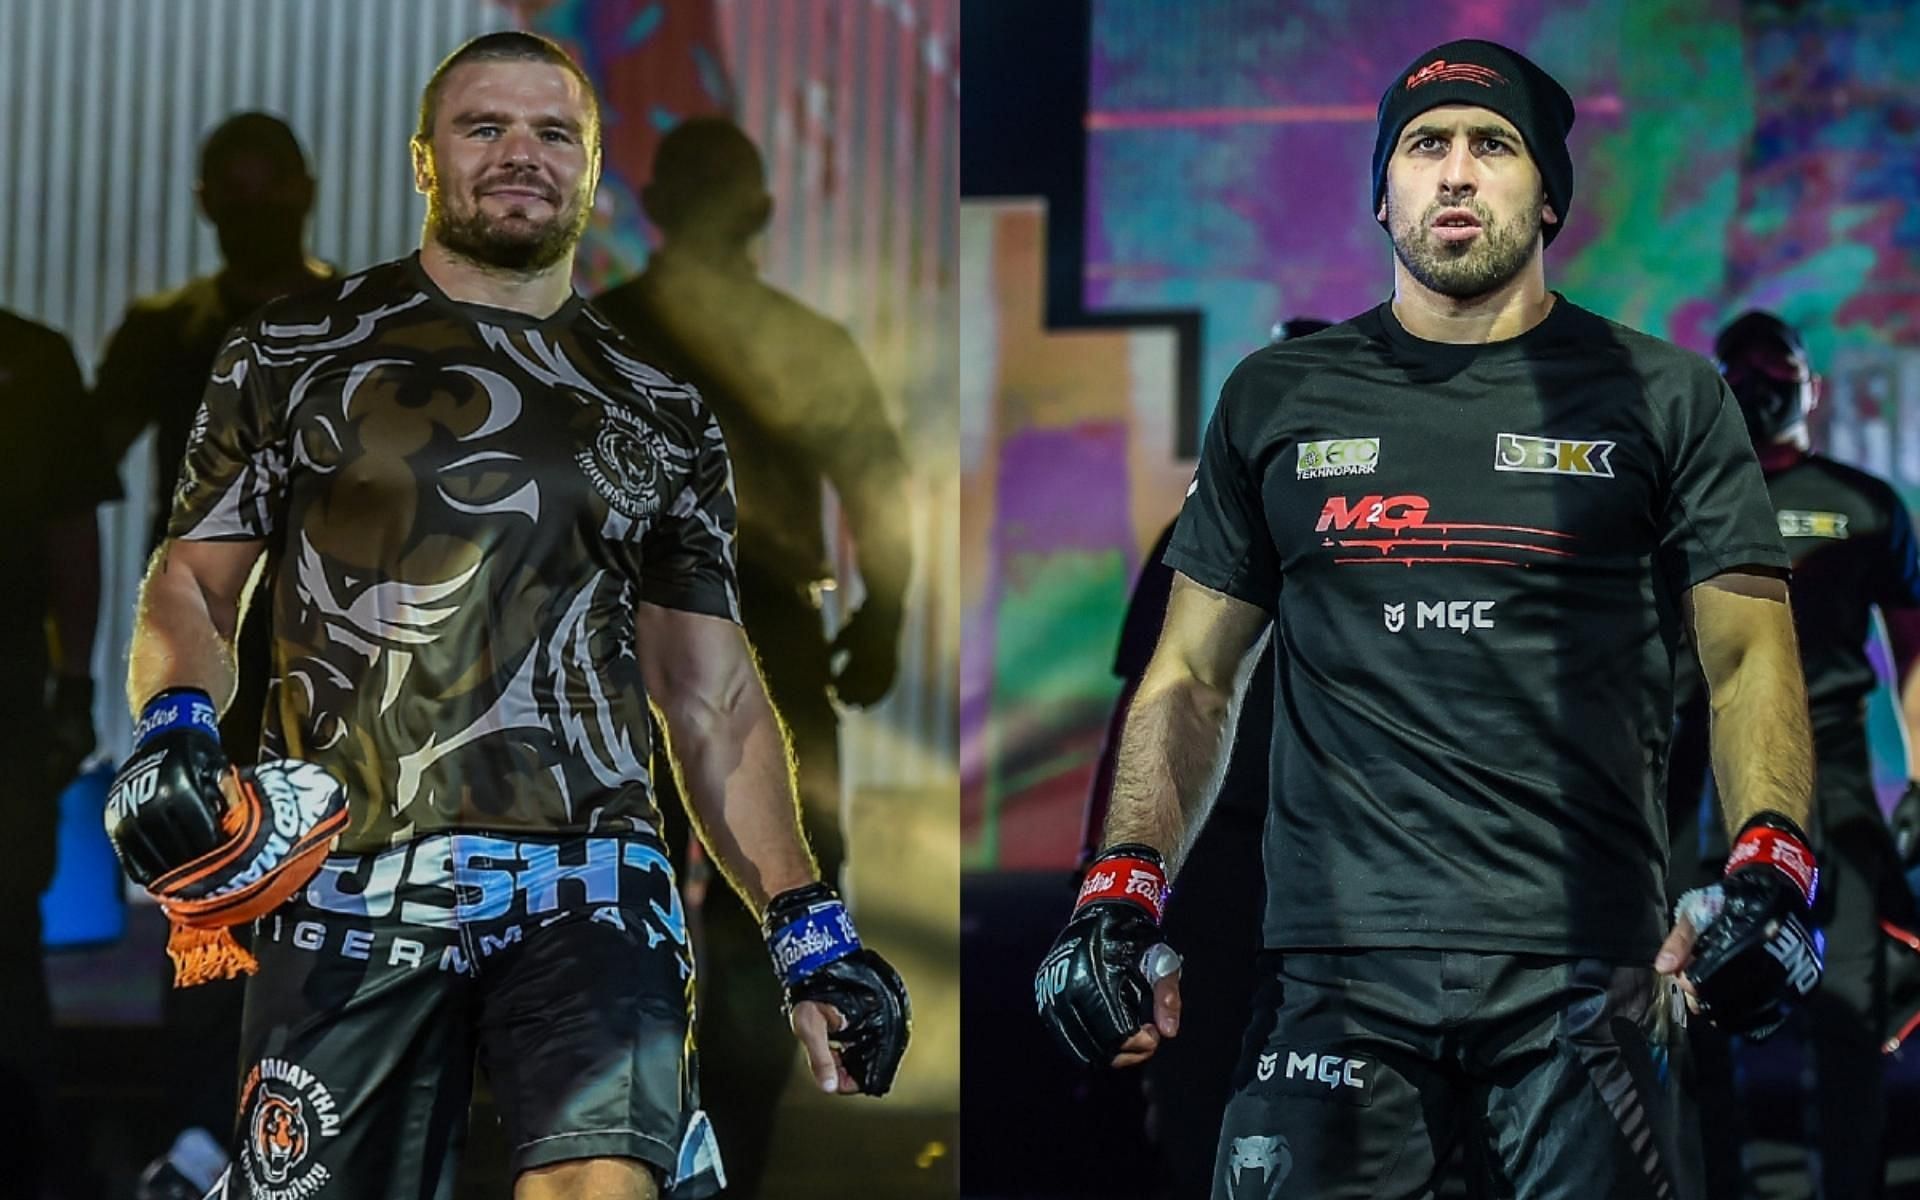 Undefeated heavyweights Anatoly Malykhin and Kirill Grishenko will fight for the interim belt at ONE: Bad Blood. (Images courtesy of ONE Championship)